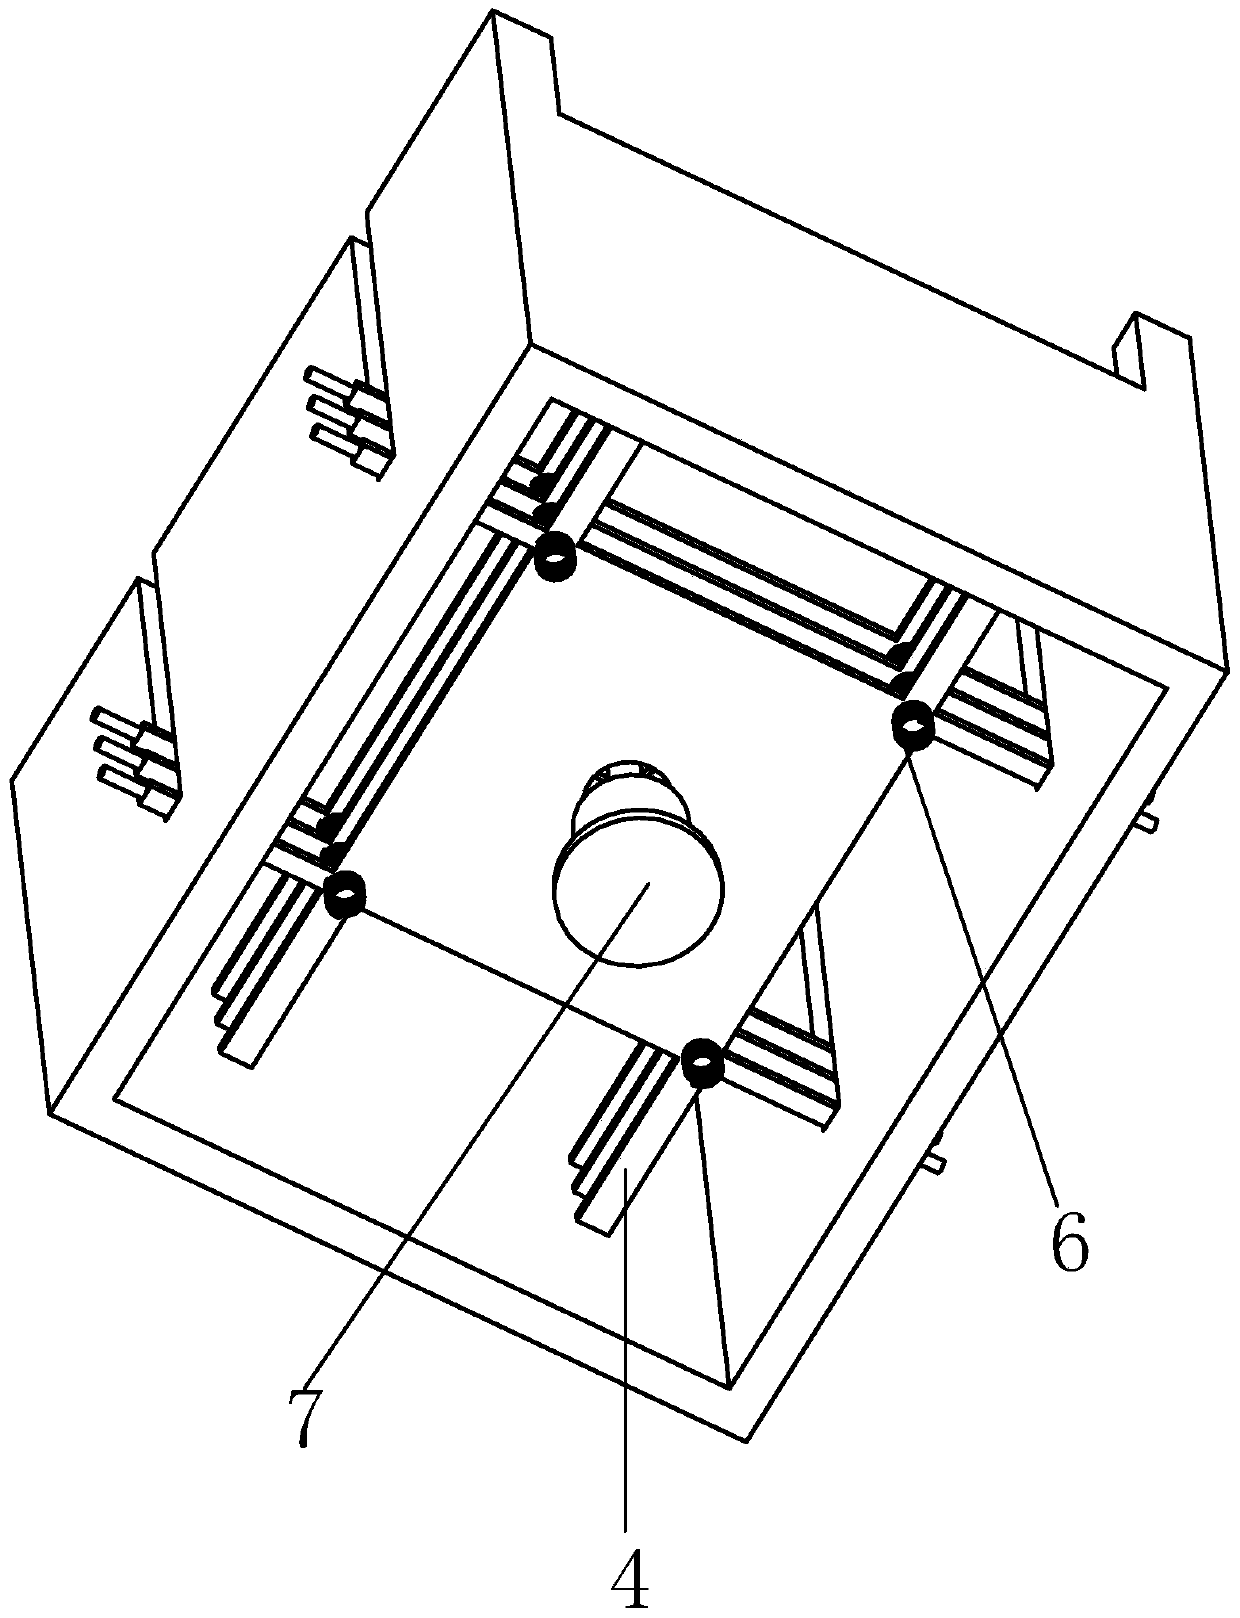 Storage box for receiving disk parts